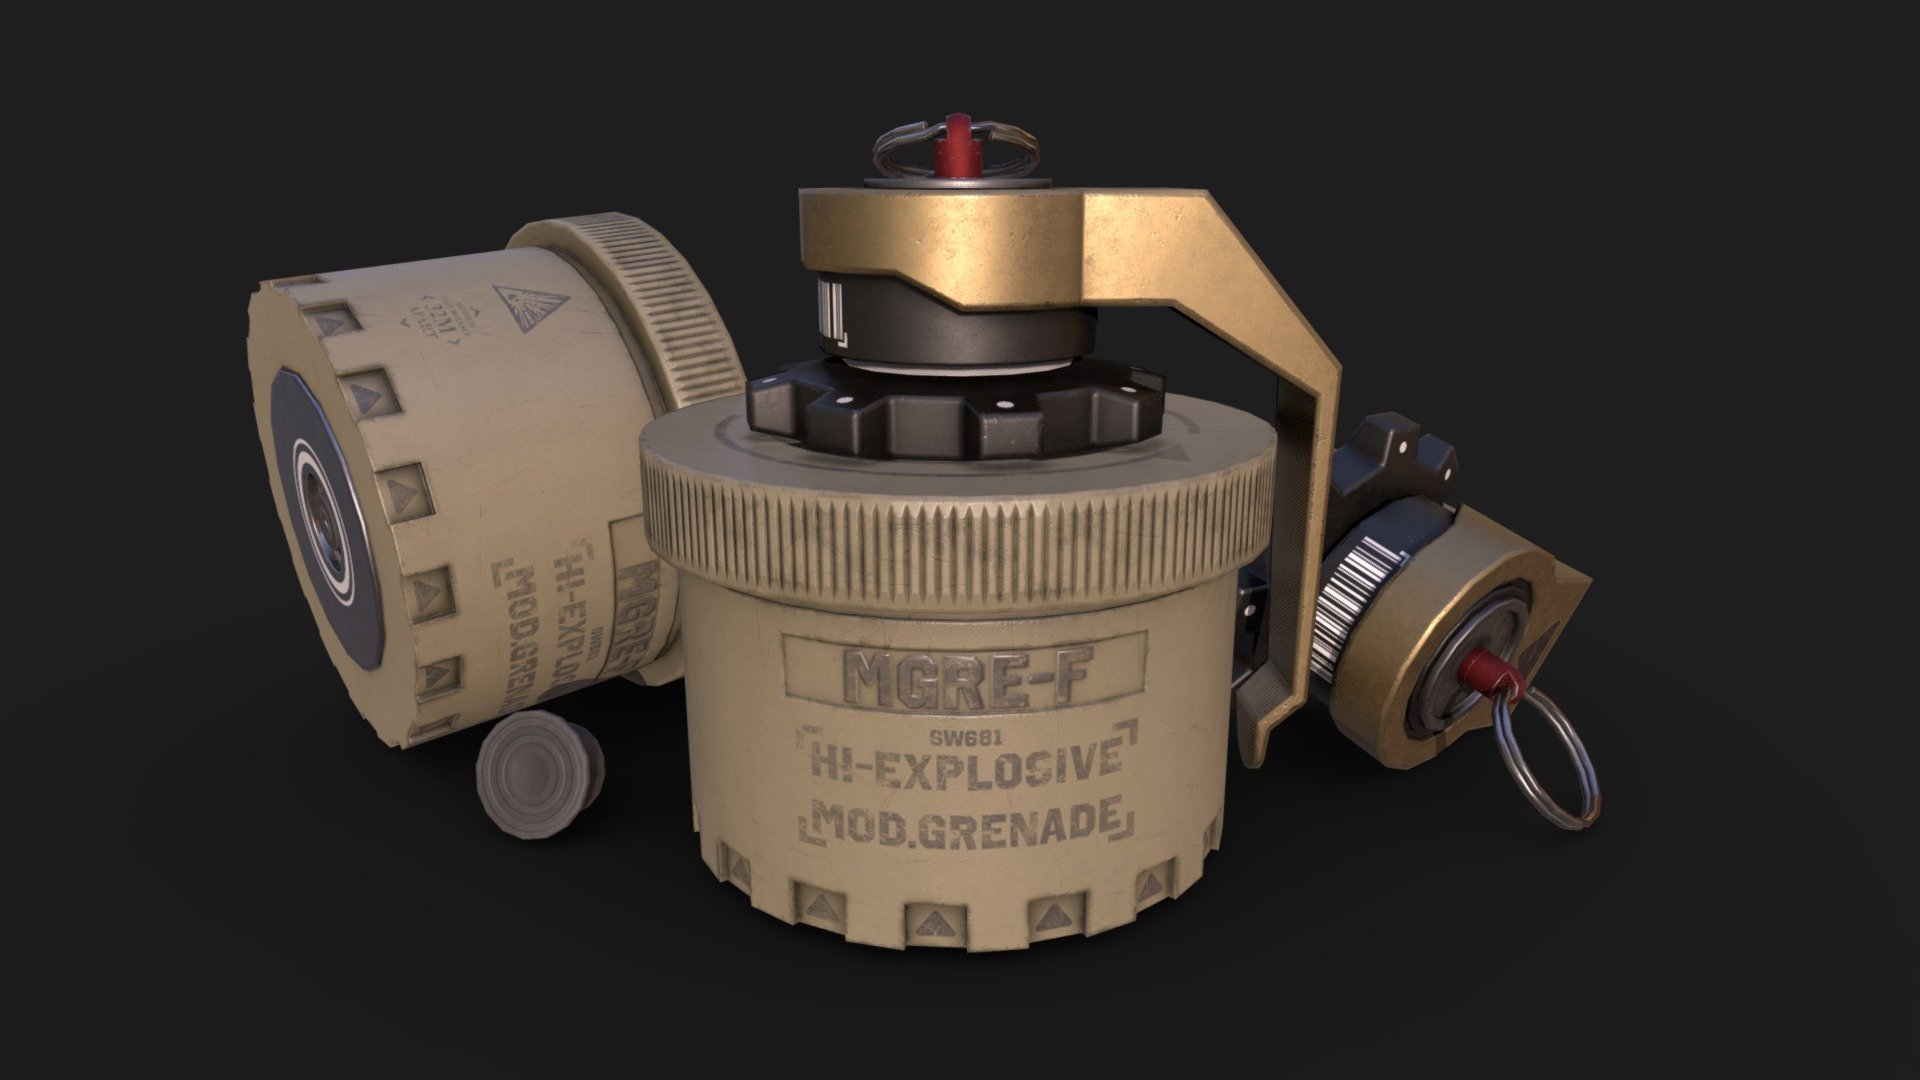 The model was based on the Swedish ehgr08 modular grenade.

Composition:

This asset consists of 5 parts: Explosive module, detonator, ring, rod and rubber stopper.

Pipeline:

Modeled in Blender, baked in Marmoset, textured in Substance Painter
 - Explosive modular grenade - 3D model by ZIFS 3d model